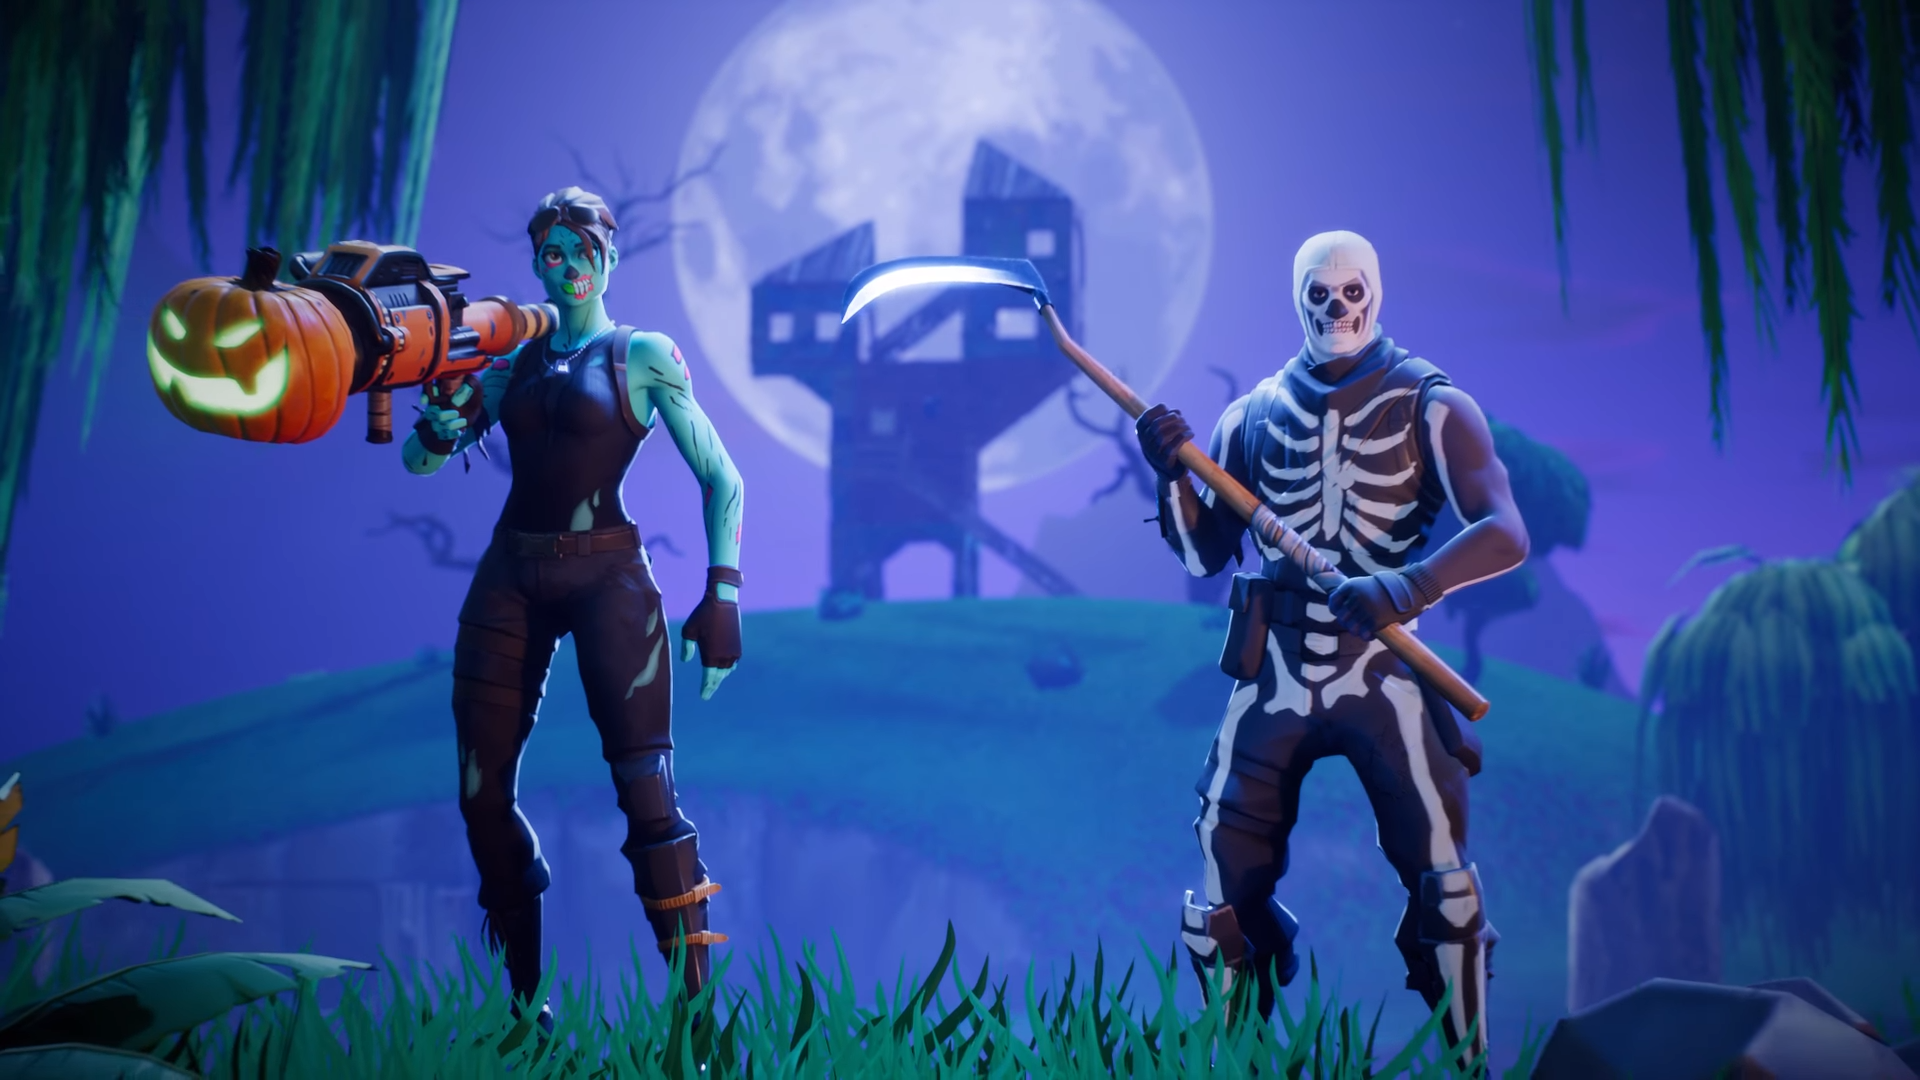 Fortnite Battle Royale Mode Coming September 26 to Xbox One - Xbox Wire